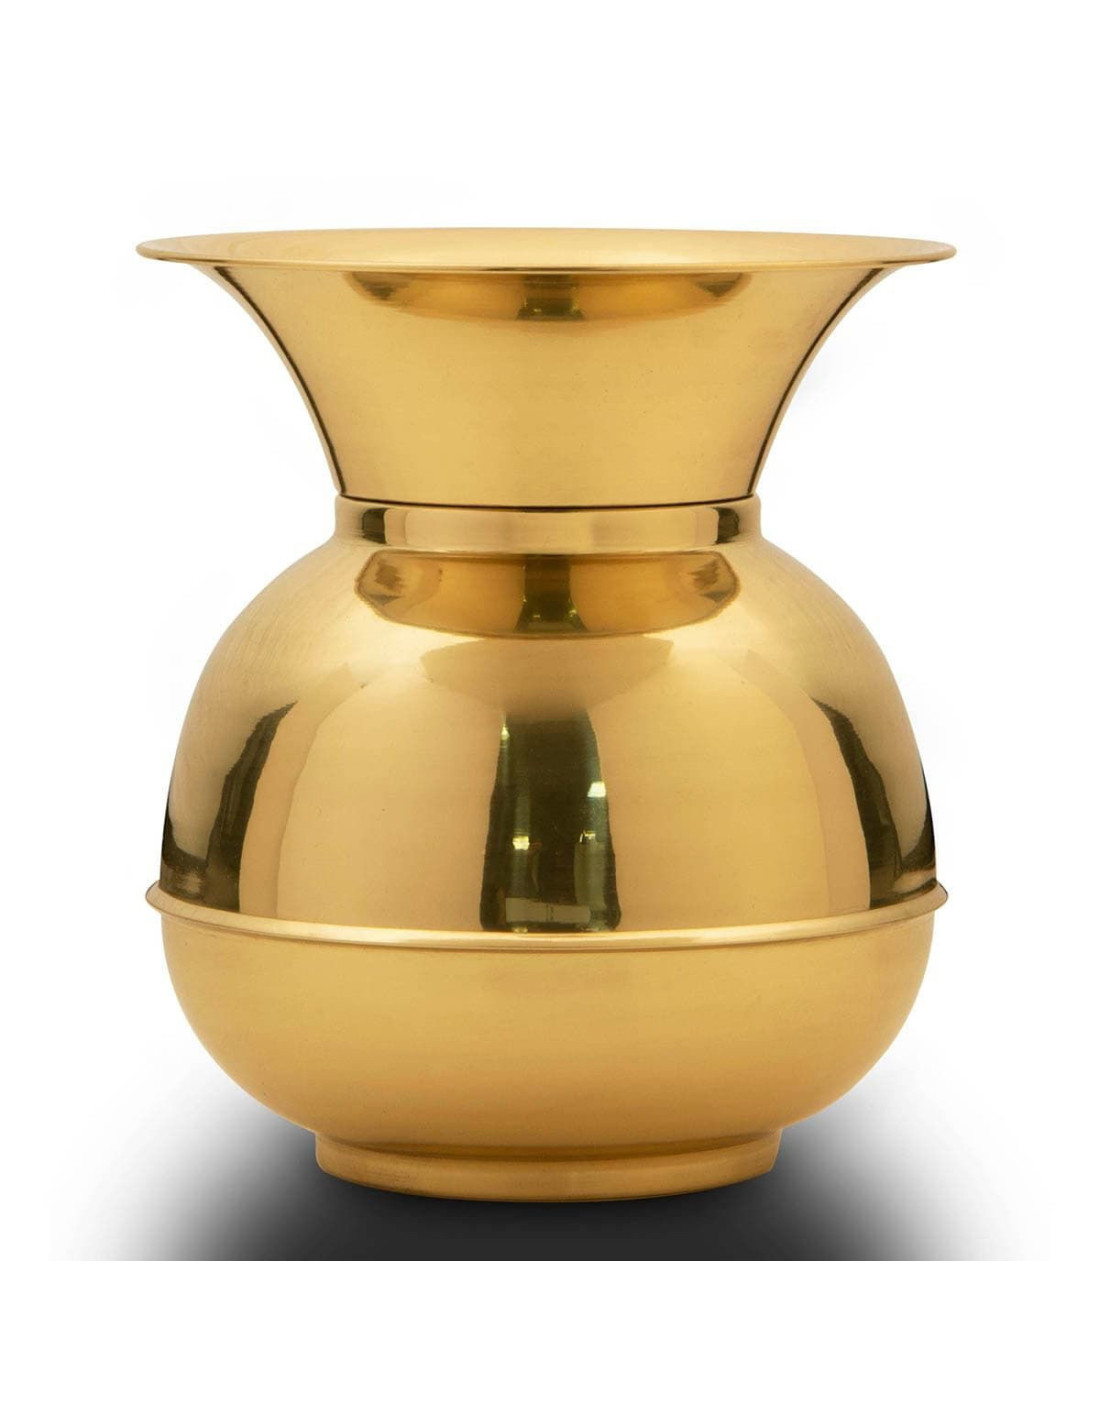 Old West Brass Spittoon Replica ⚔️ Medieval Shop